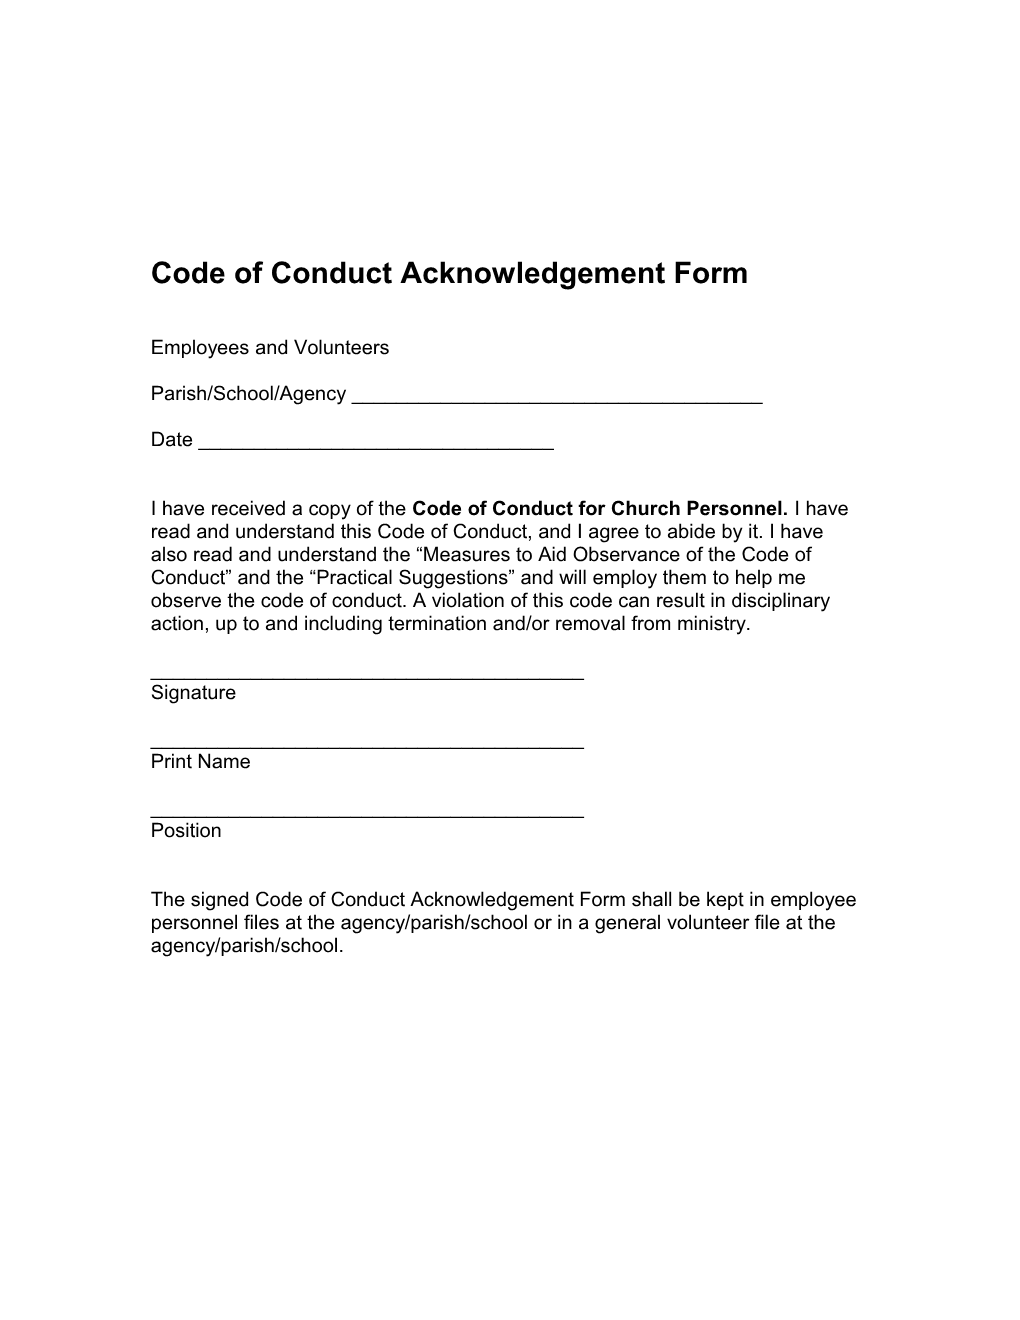 Code of Conduct Acknowledgement Form